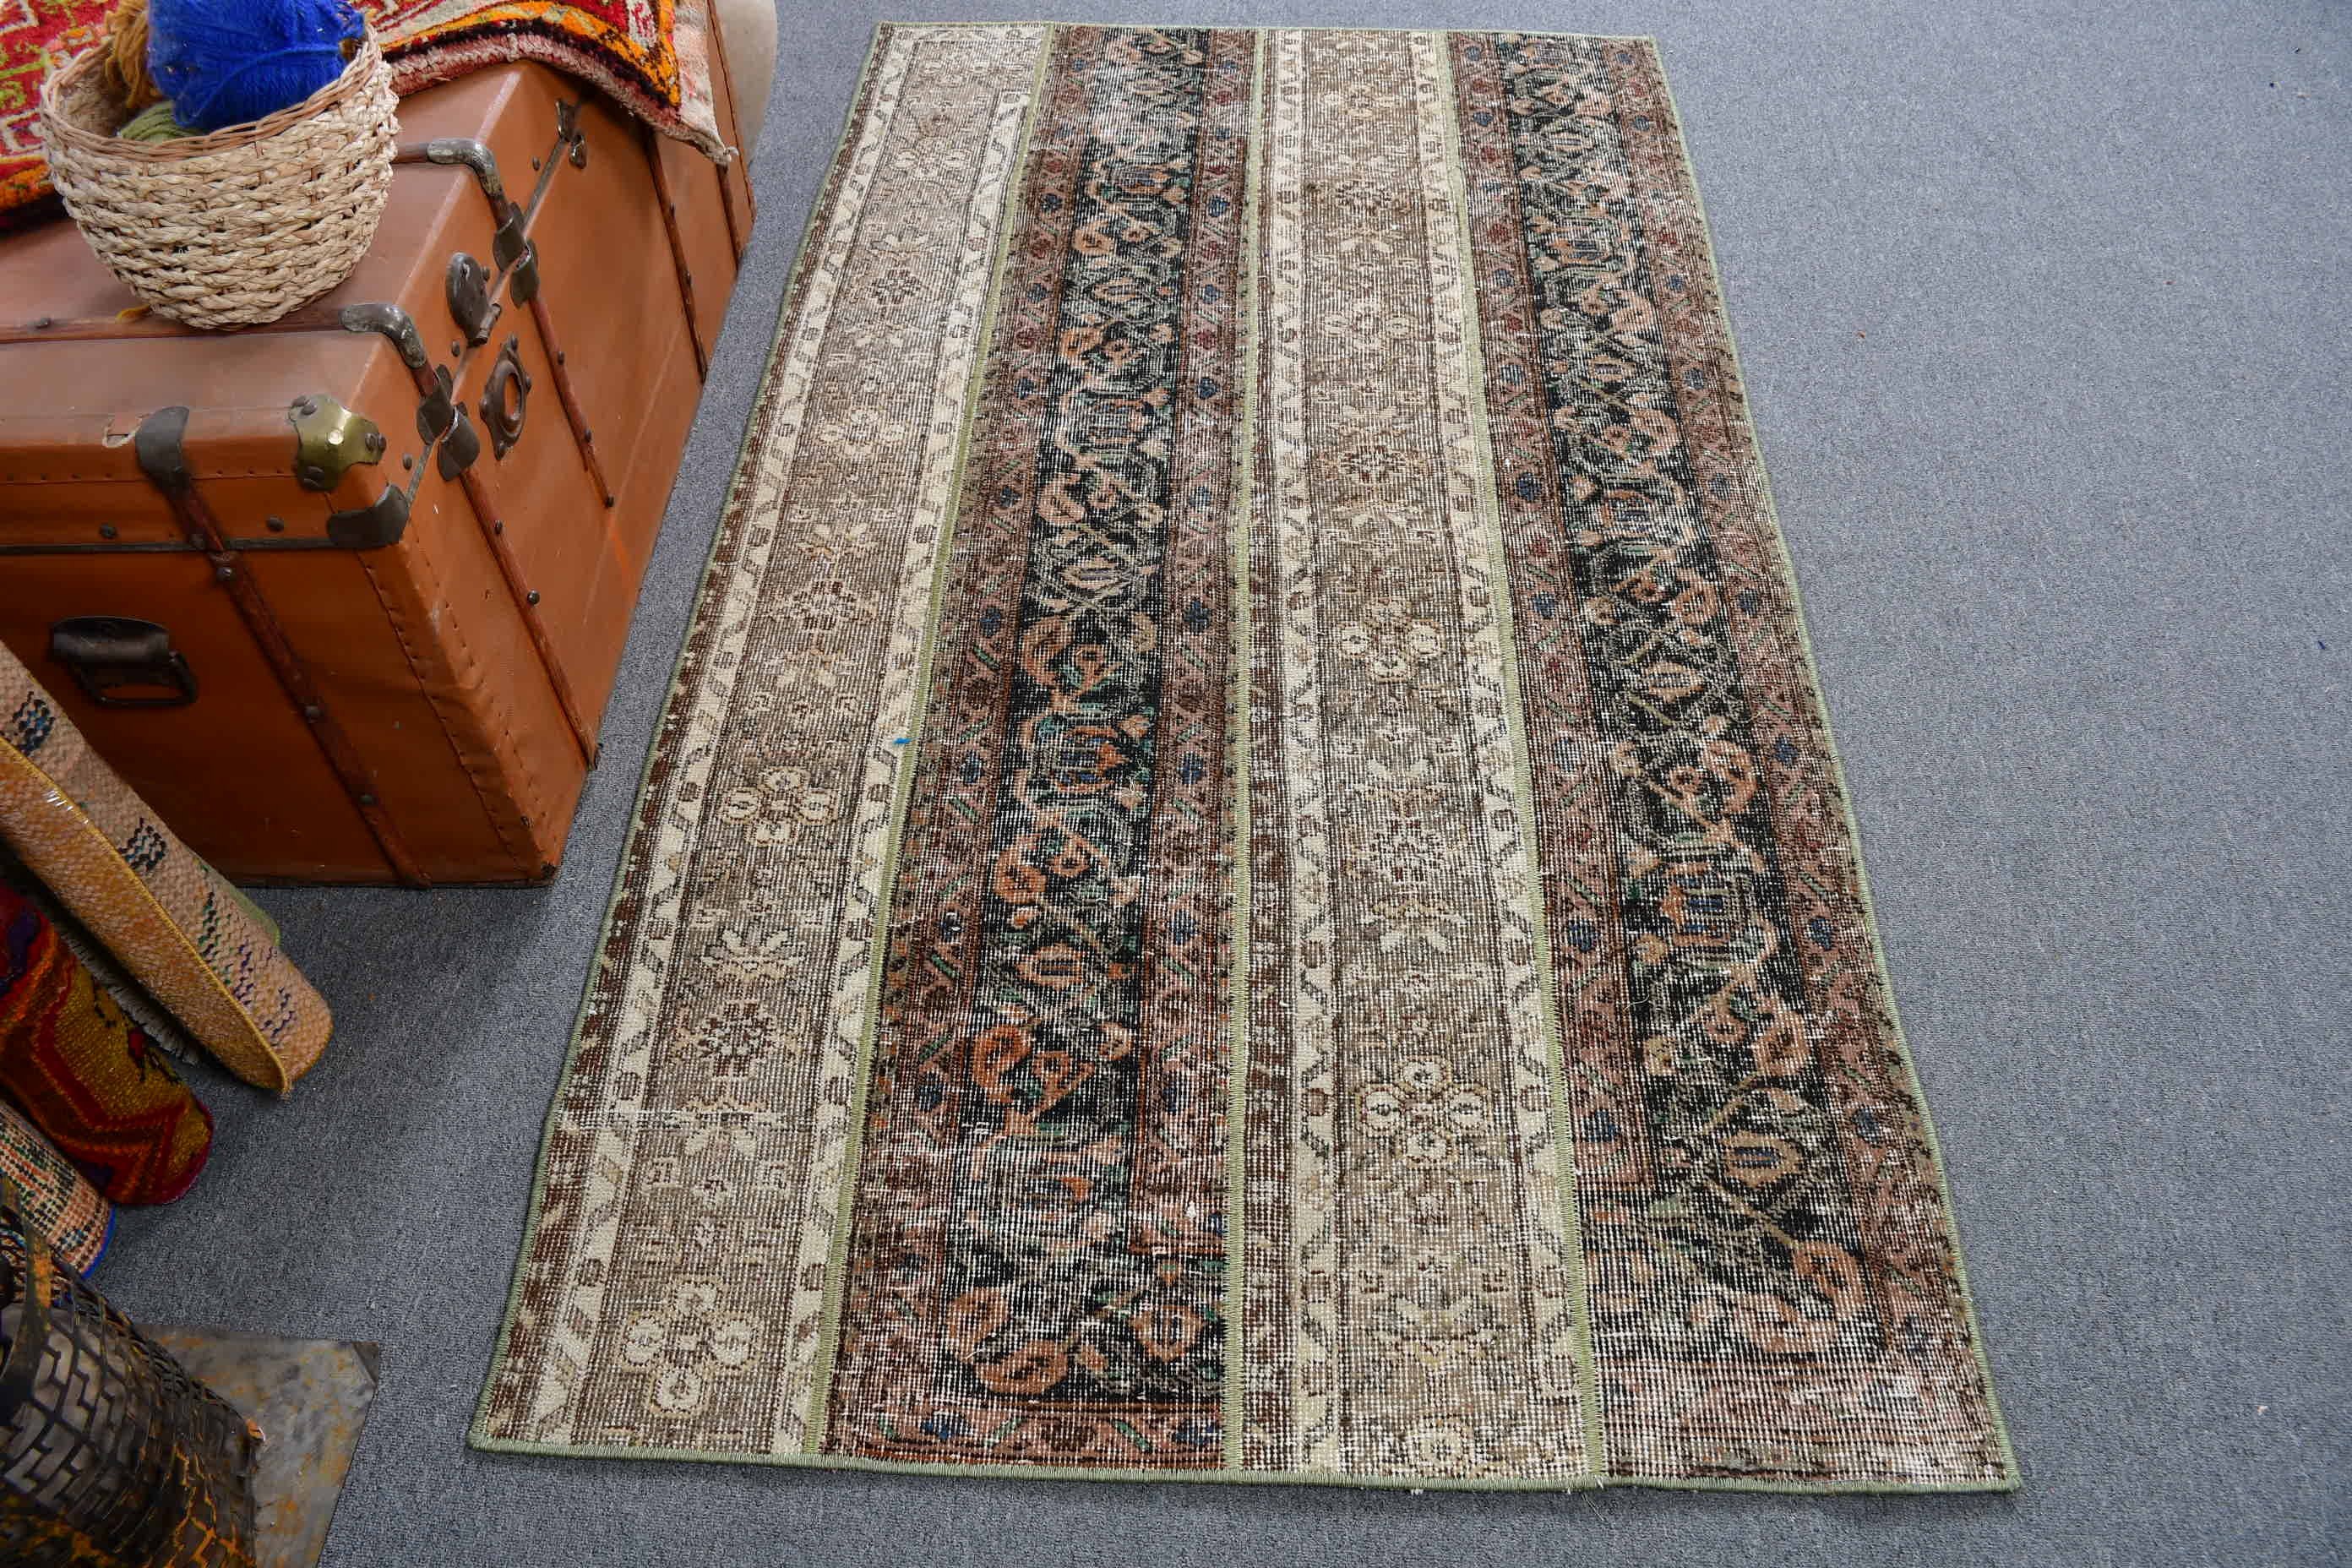 Vintage Rug, Kitchen Rugs, Nursery Rugs, Entryway Rug Rugs, 3.4x6.2 ft Accent Rugs, Cool Rug, Turkish Rug, Rugs for Entry, Oushak Rugs